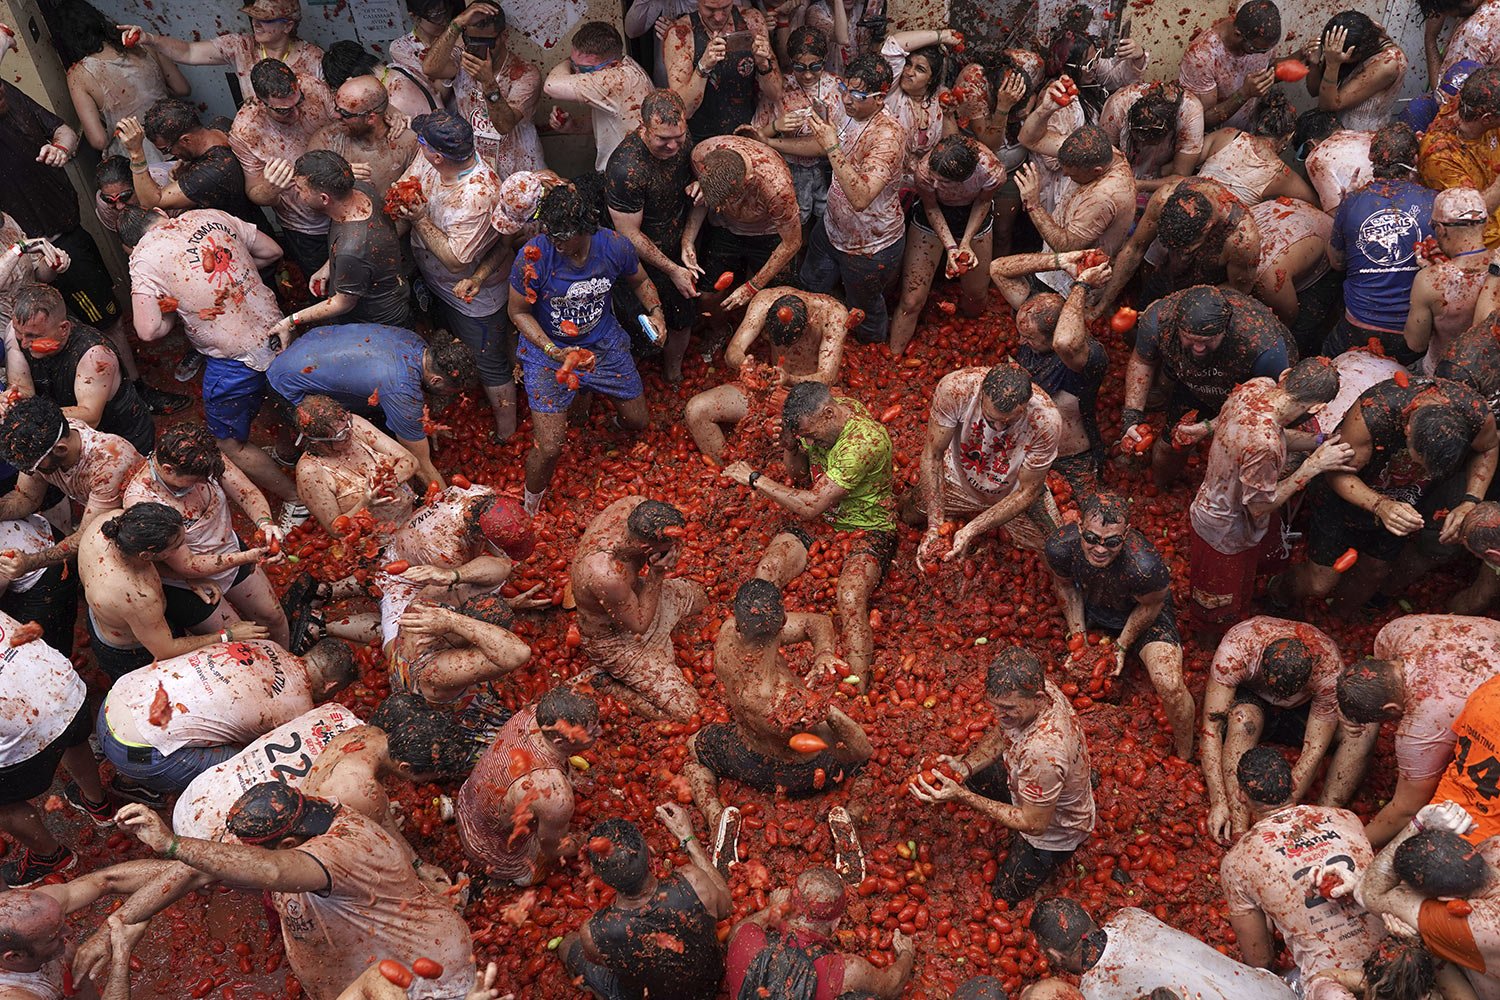  People pelt each other with overripe tomatoes, during the annual "Tomatina" festival, in Bunol, Spain, Wednesday, Aug. 30, 2023. (AP Photo/Alberto Saiz) 